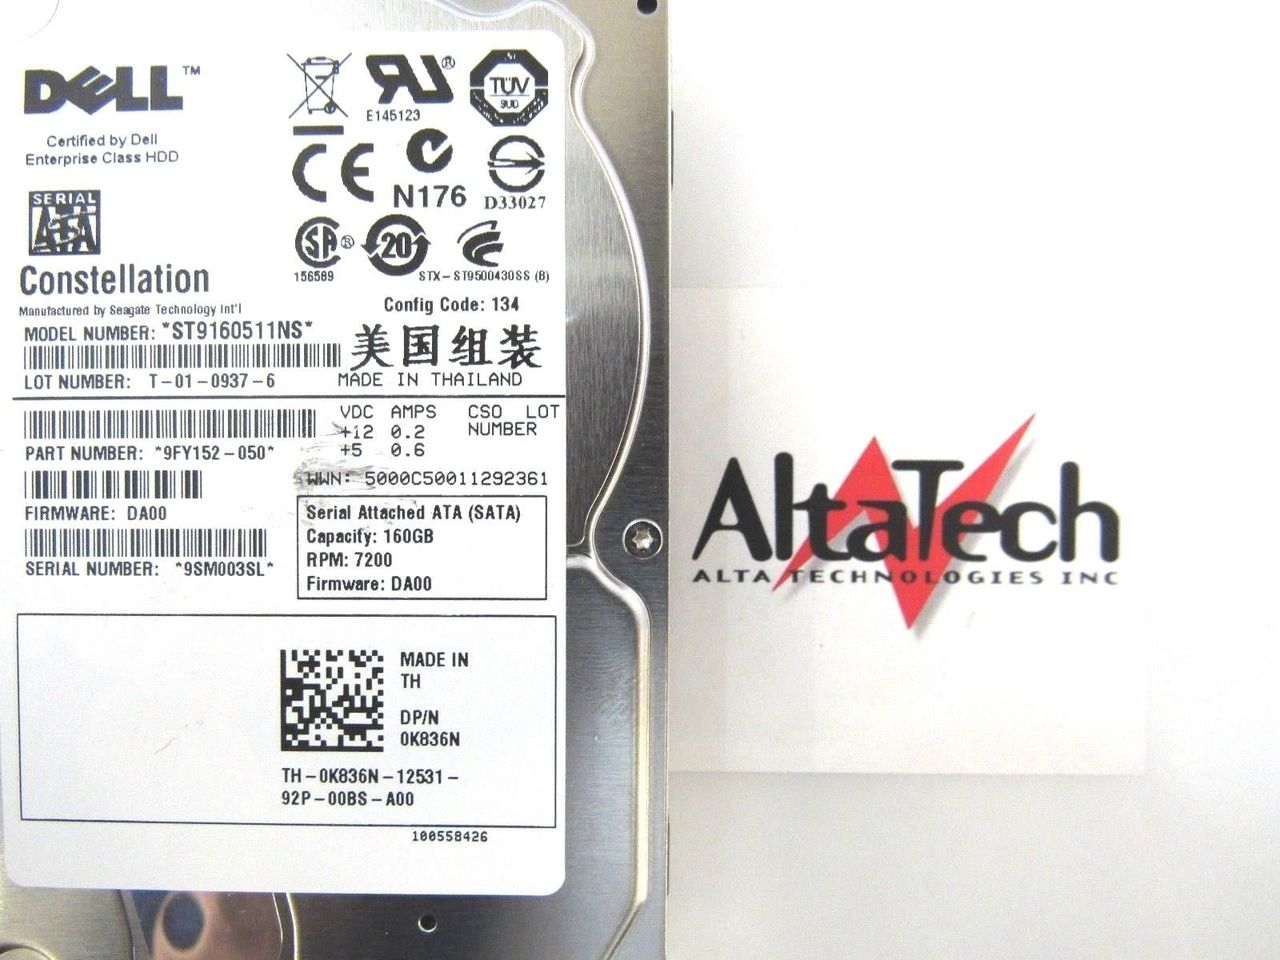 Seagate ST9160511NS Seagate ST9160511NS 160GB 7.2K SATA 2.5" 3G HDD Dell 9FY152-050 Hard Disc Drive, Used